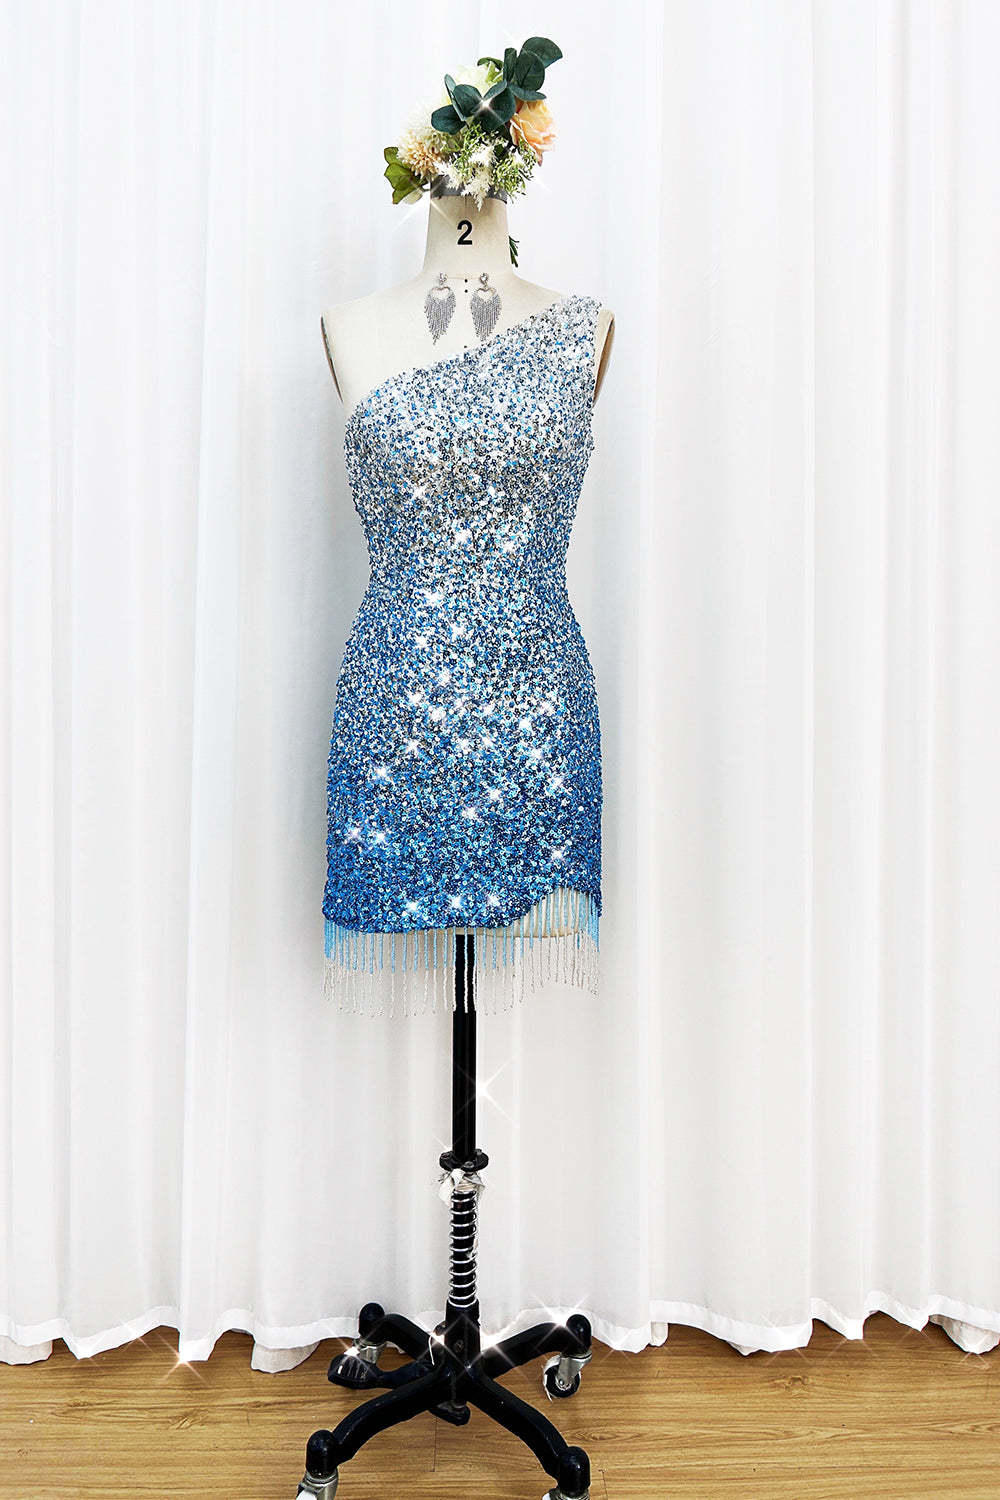 Sparkly Bodycon Spaghetti Straps Blue Sequins Short Homecoming Dress with Tassel